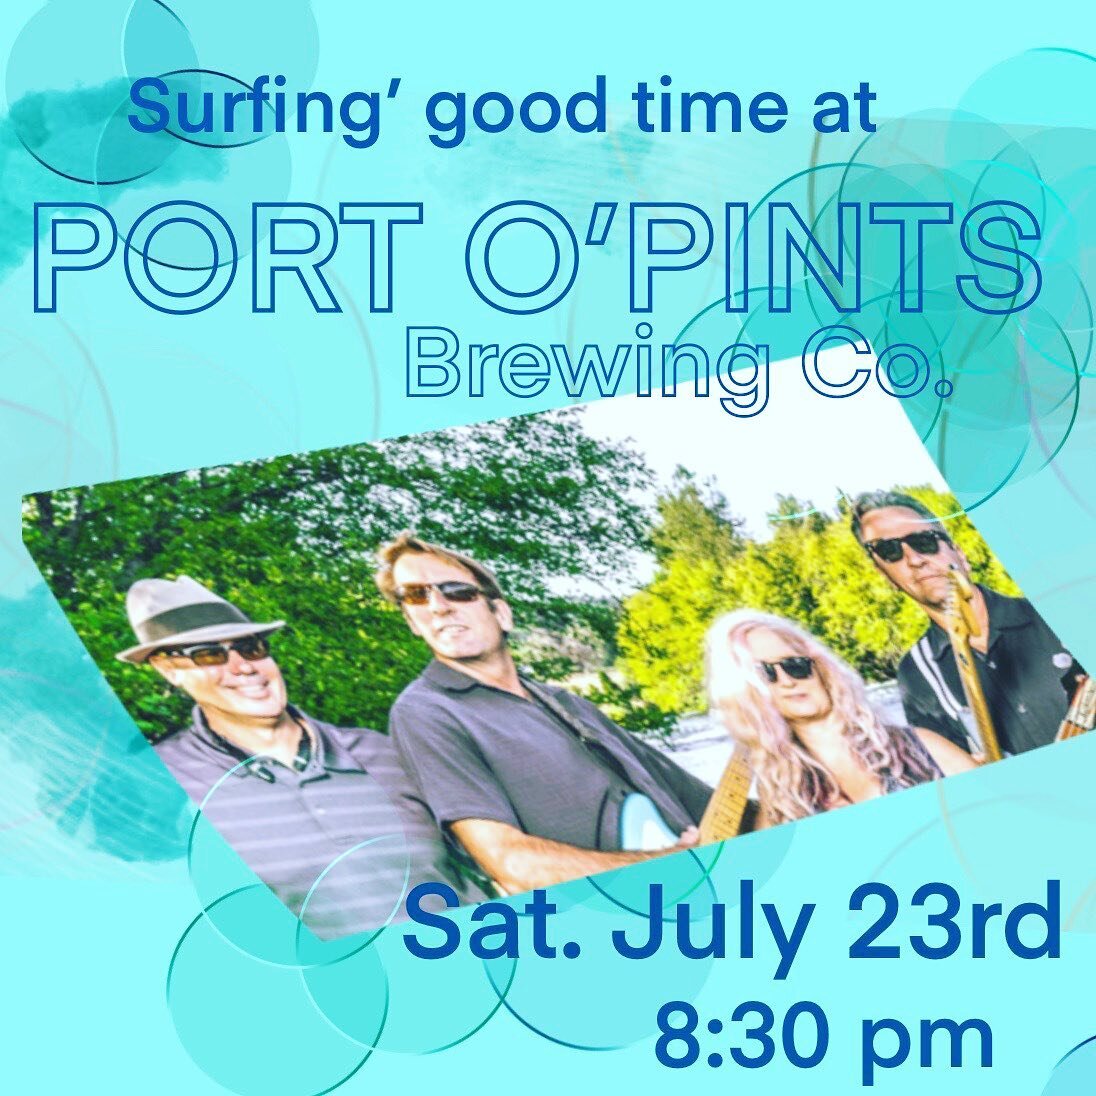 Reverberays will be hanging ten at the coast on Sat. July 23rd @portopintsbrewing! Show starts at 8:30 so please join us for a surf-rockin good time! #surfinsummer #rockinvibes #tonsofreverb #thebestbeersintheworld